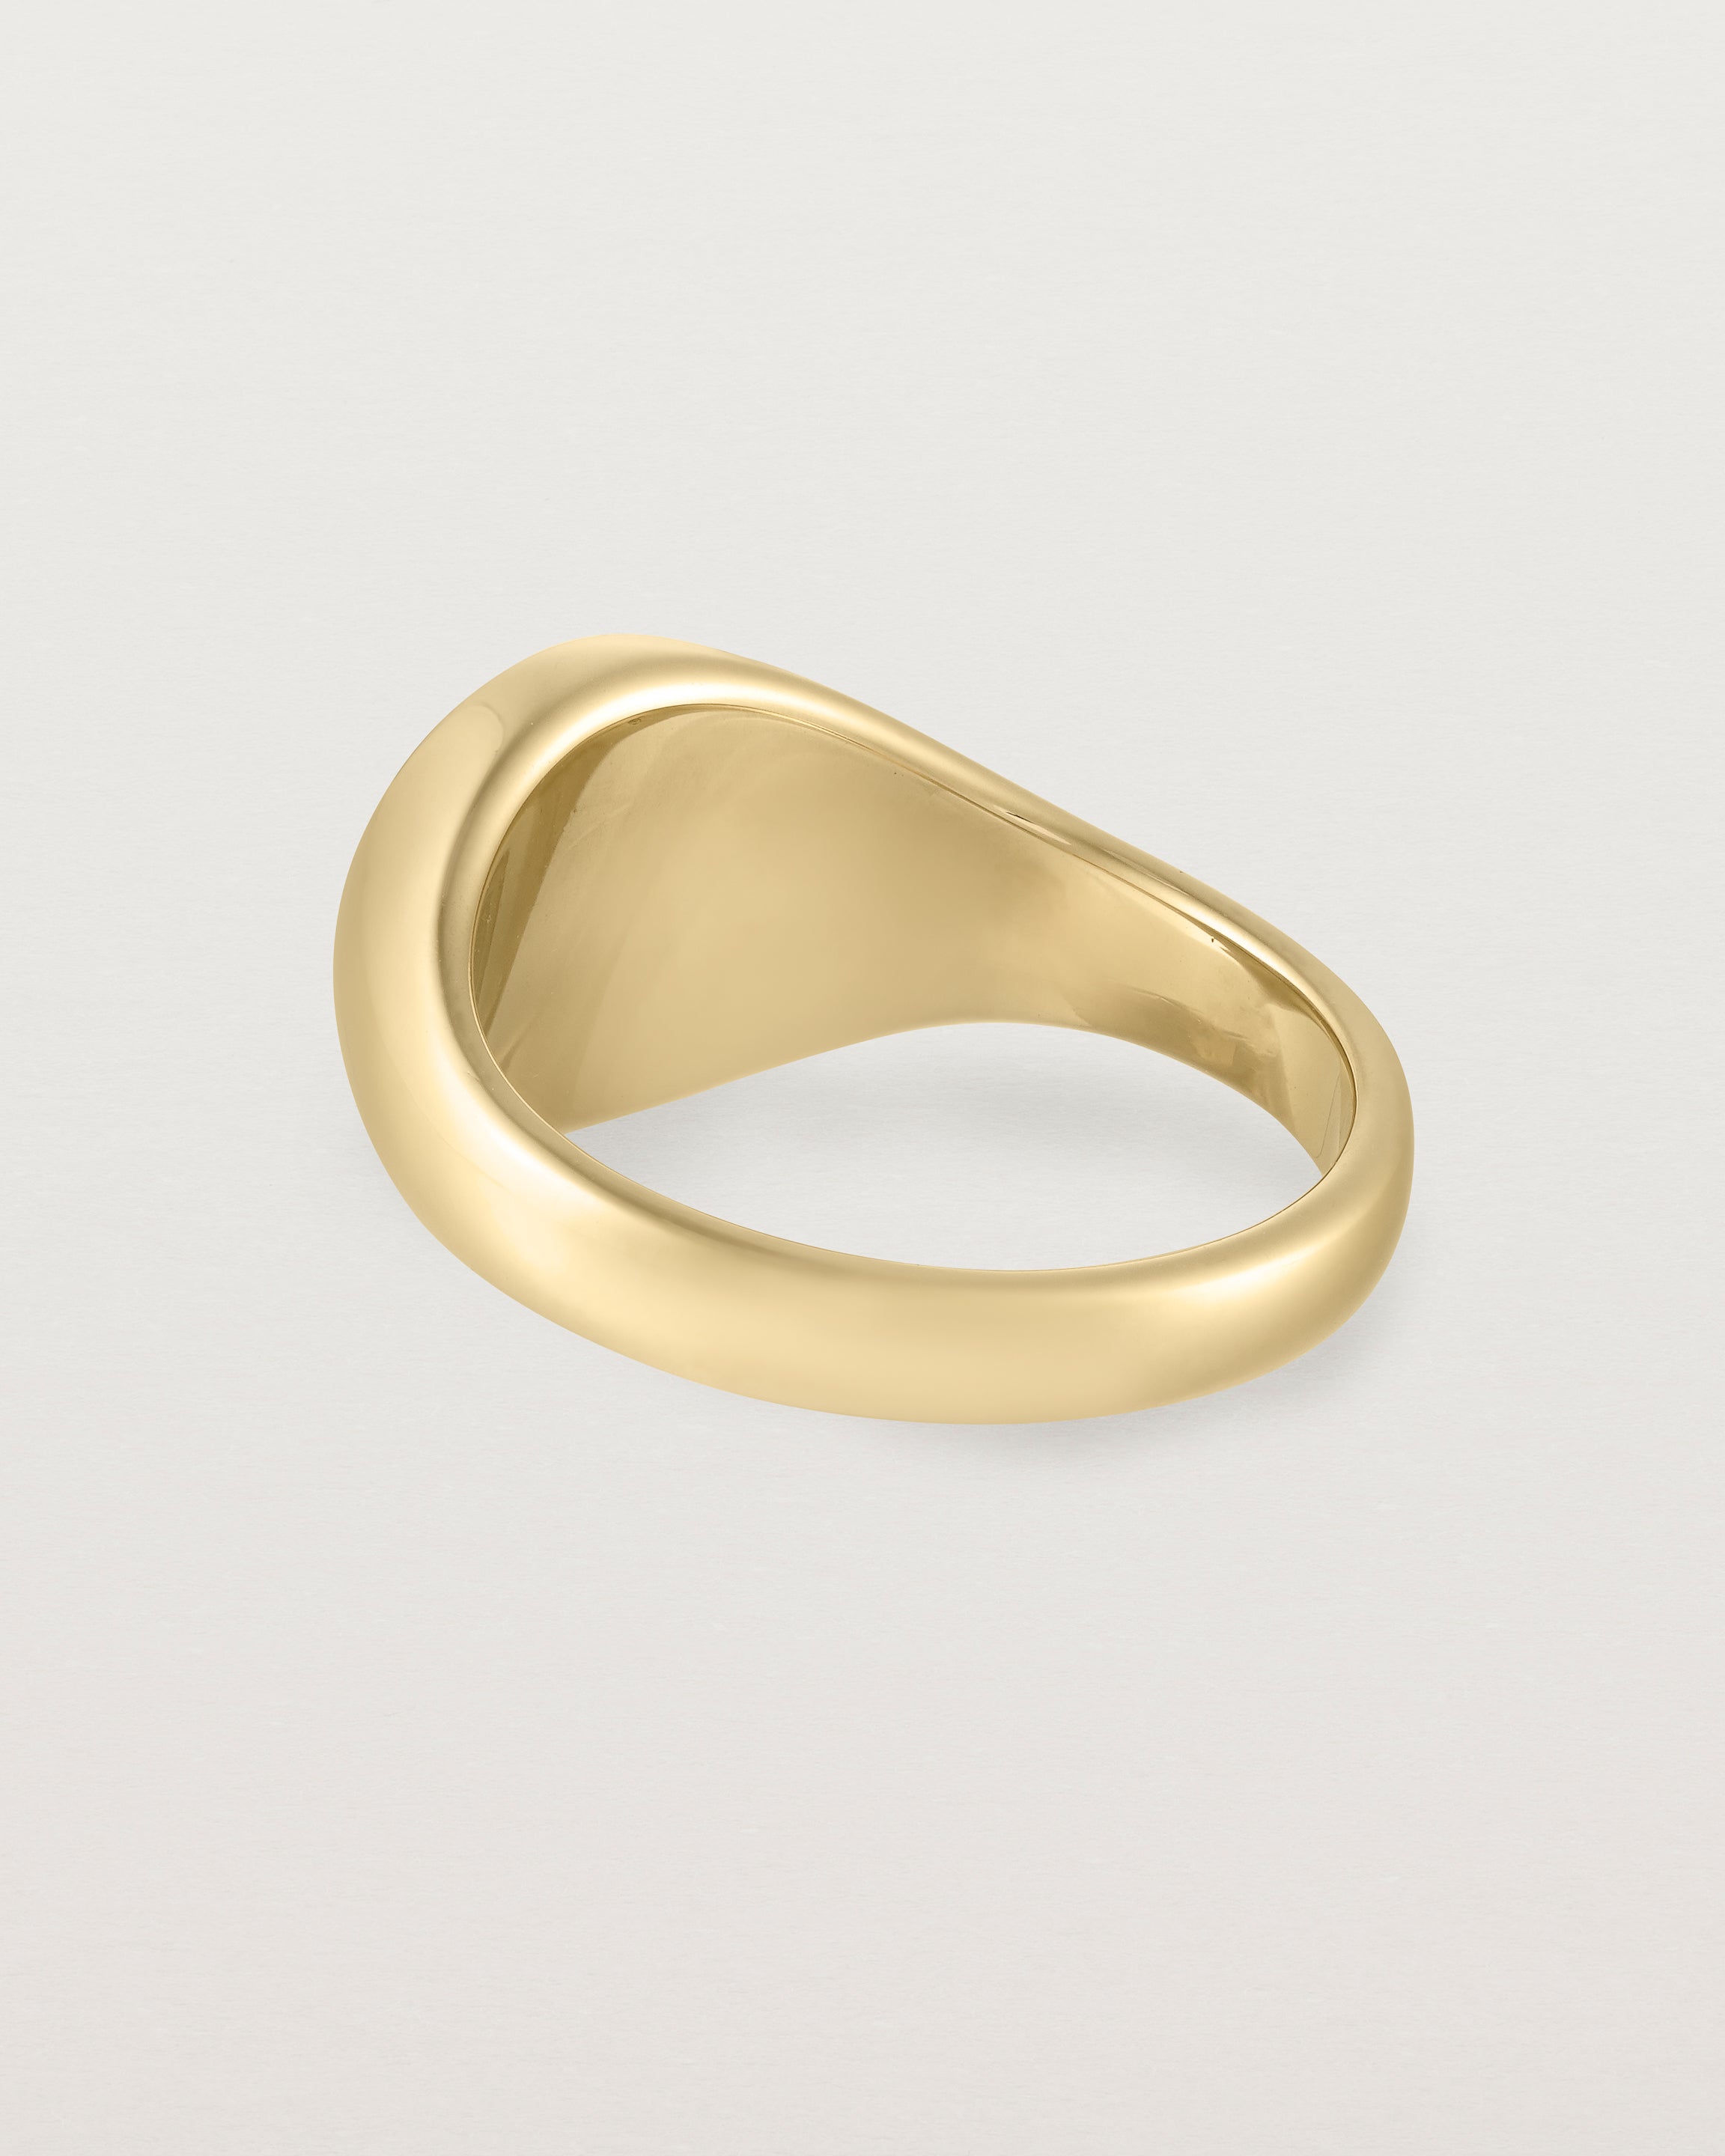 Back view of the Kian Signet Ring | Yellow Gold.